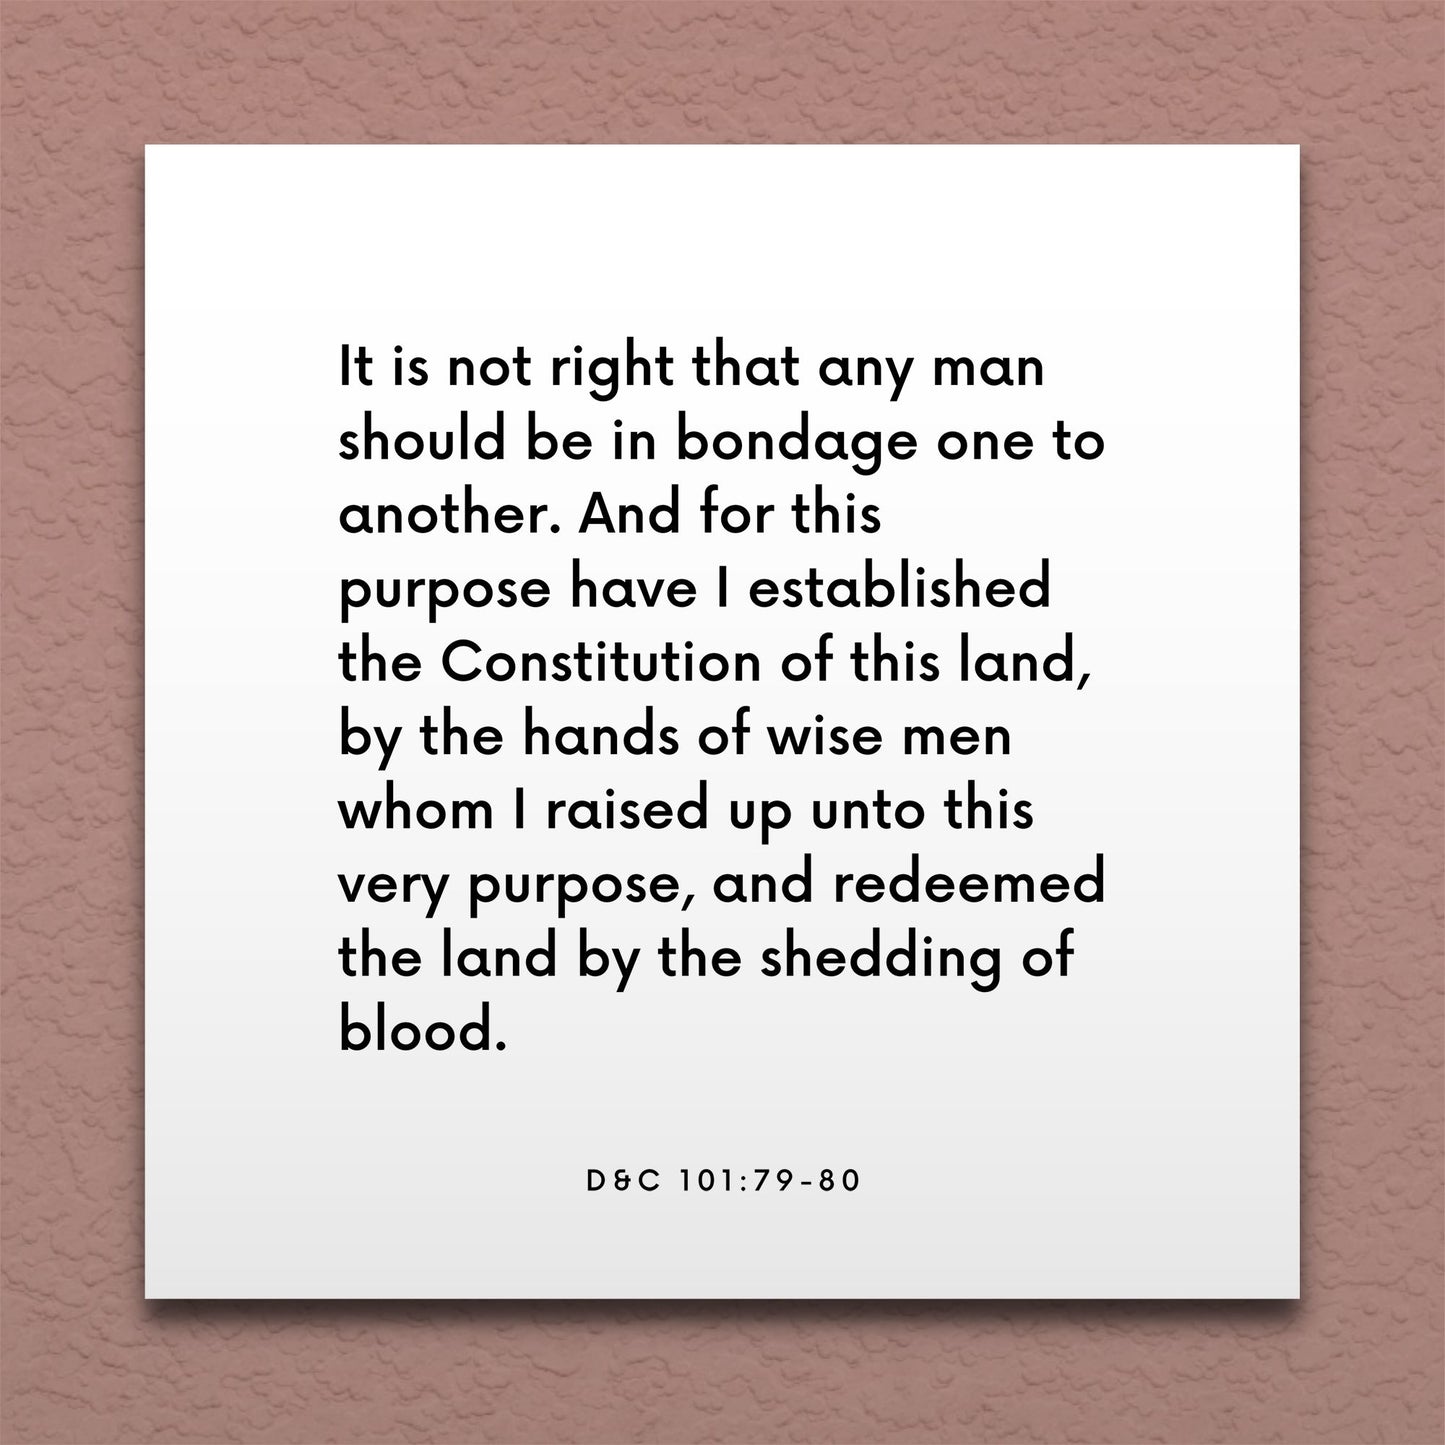 Wall-mounted scripture tile for D&C 101:79-80 - "For this purpose have I established the Constitution"